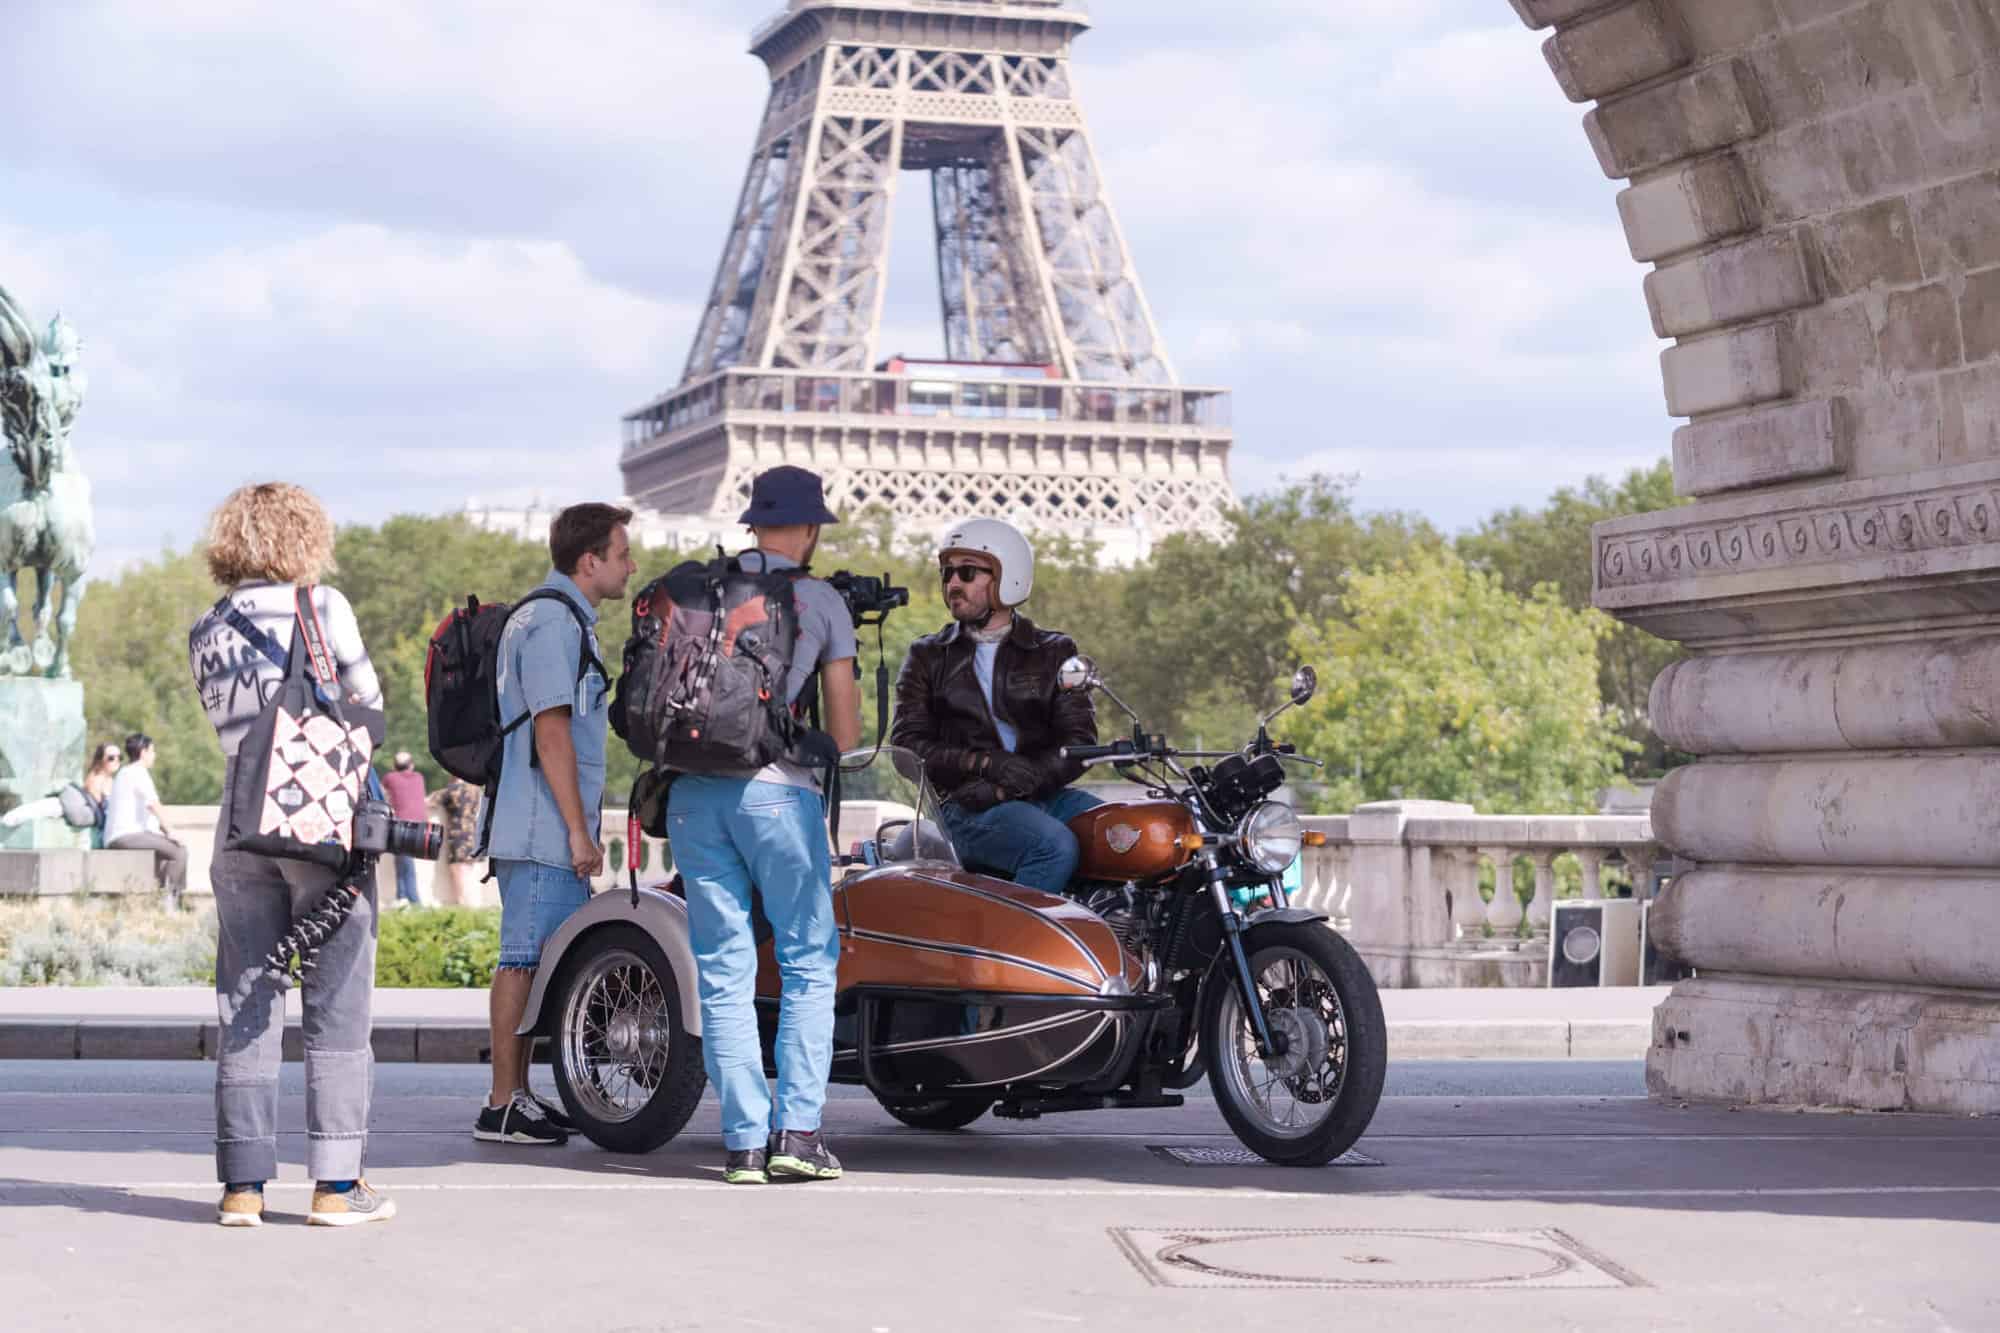 Simon Burke on his motorbike talking to passersby near the Eiffel Tower on a grey day in Paris. 